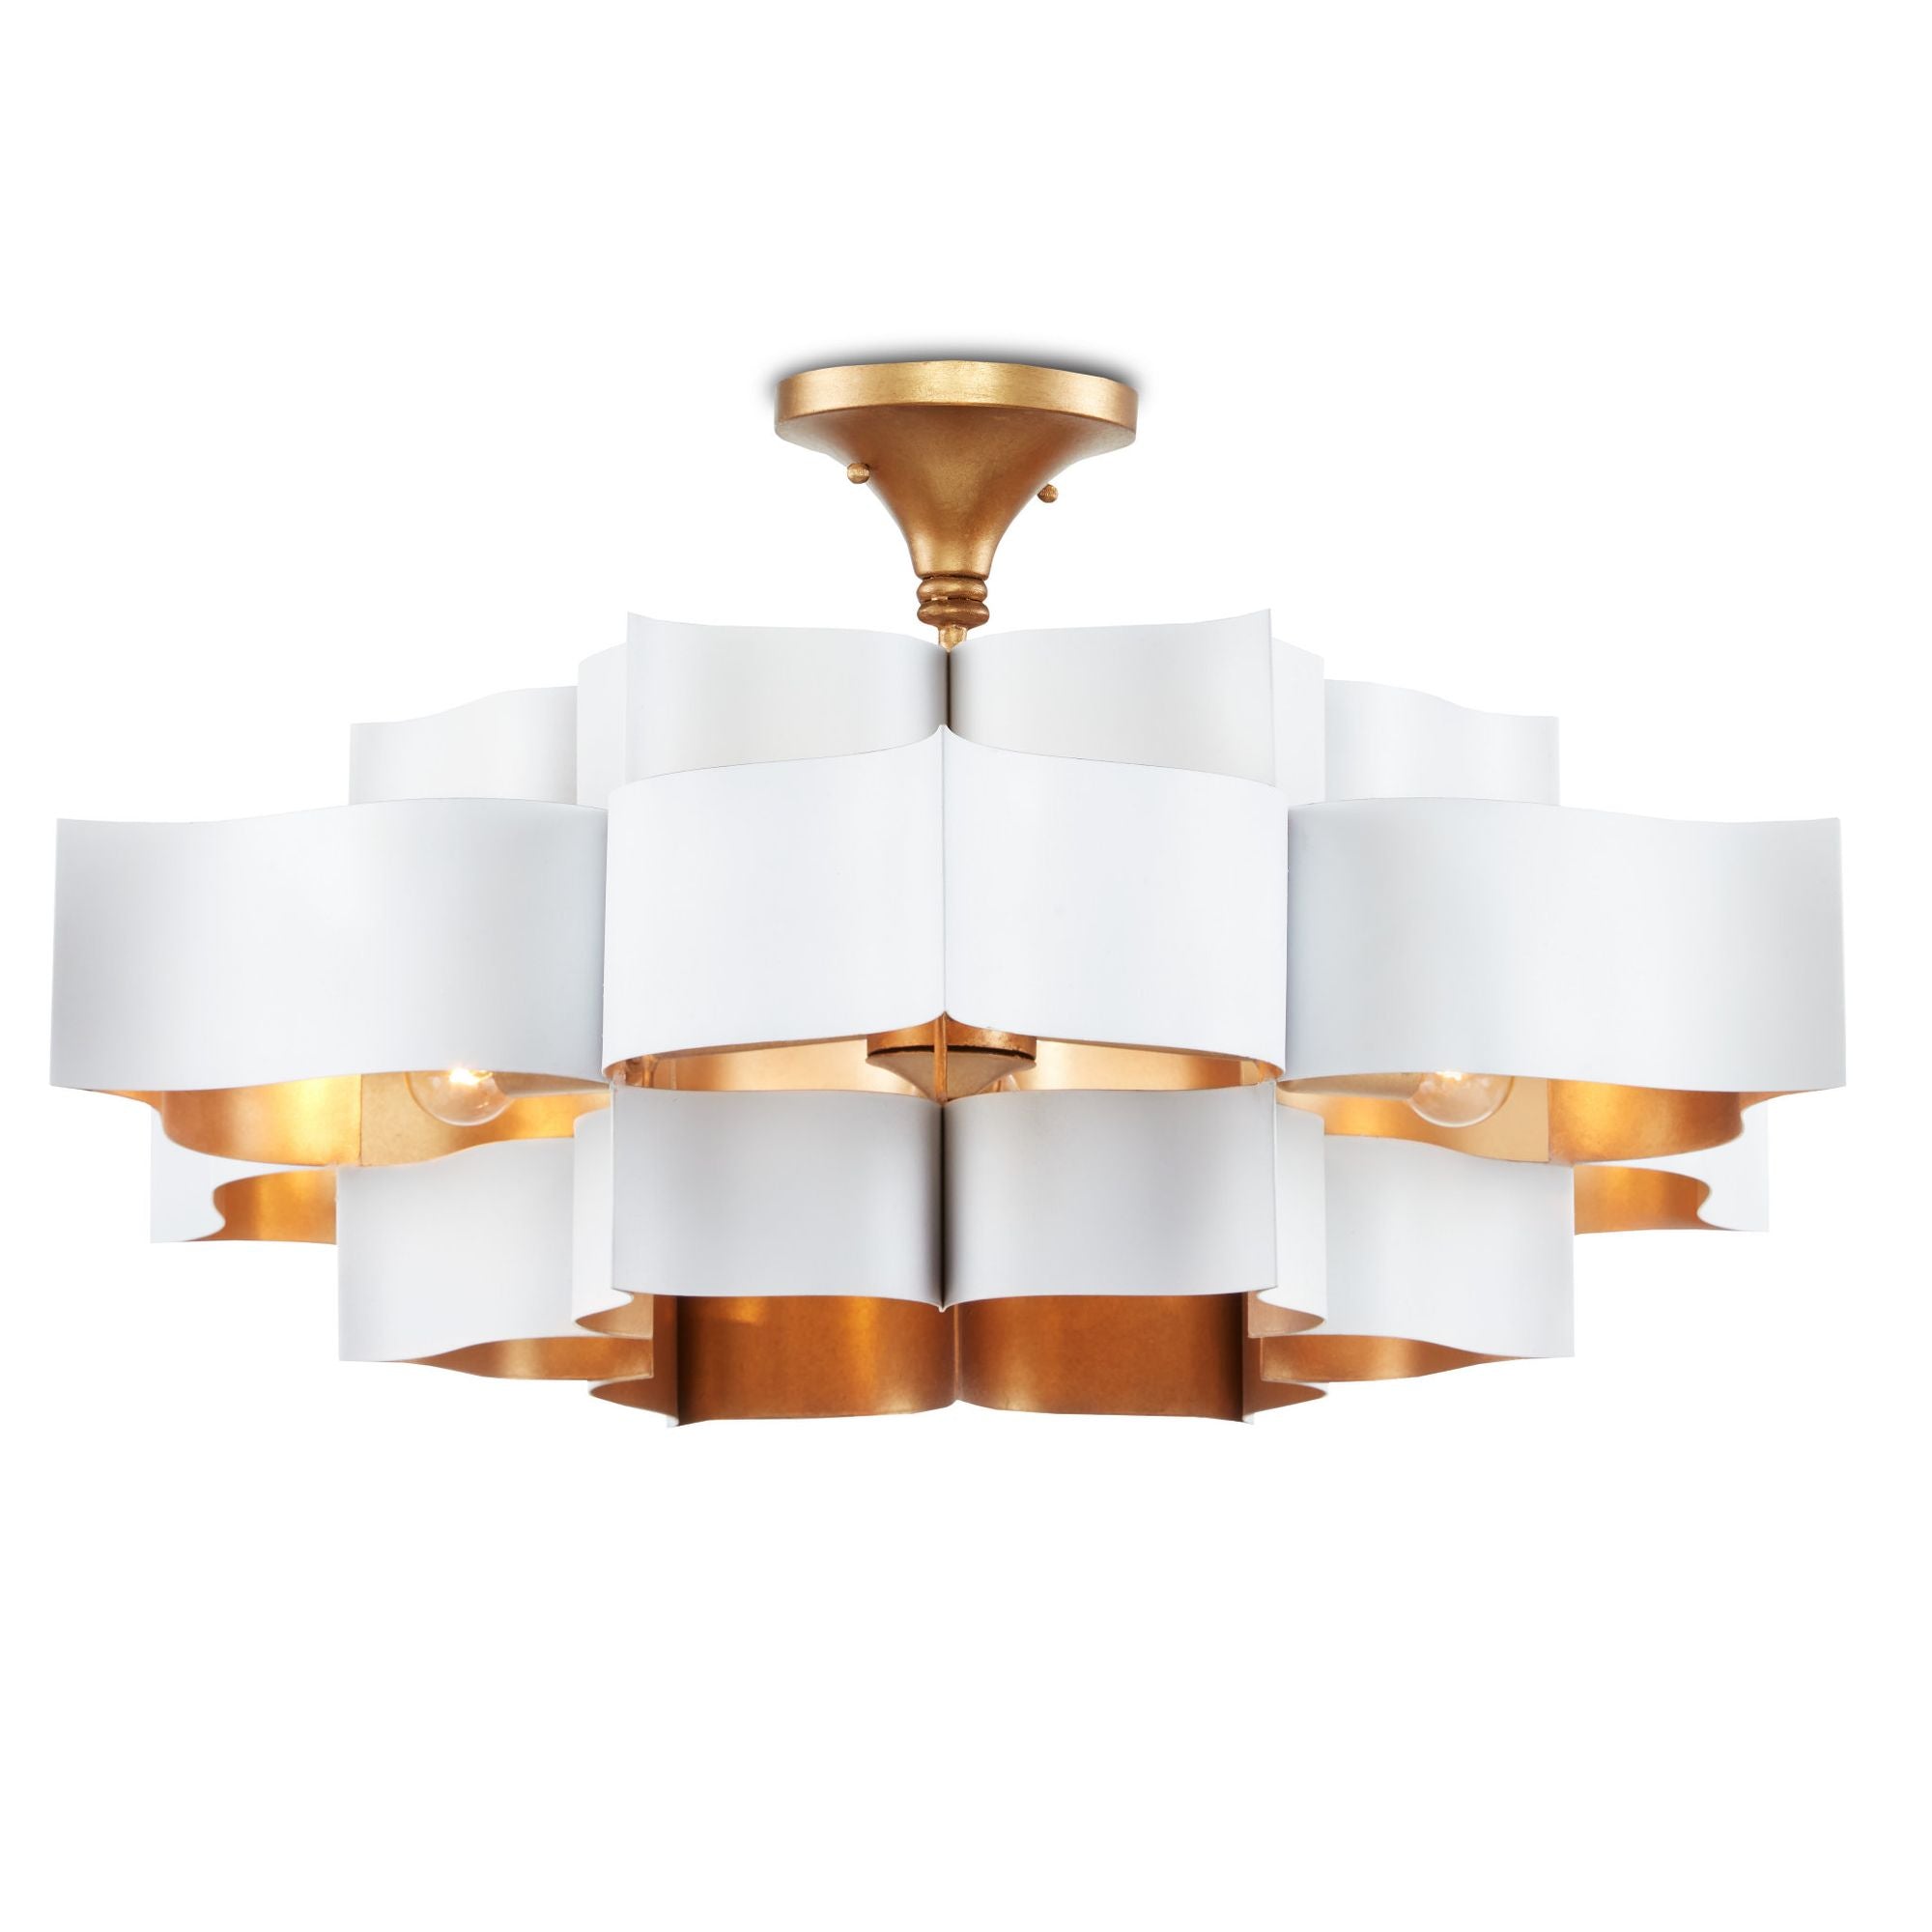 Grand Lotus Large White Chandelier - Sugar White/Contemporary Gold Leaf